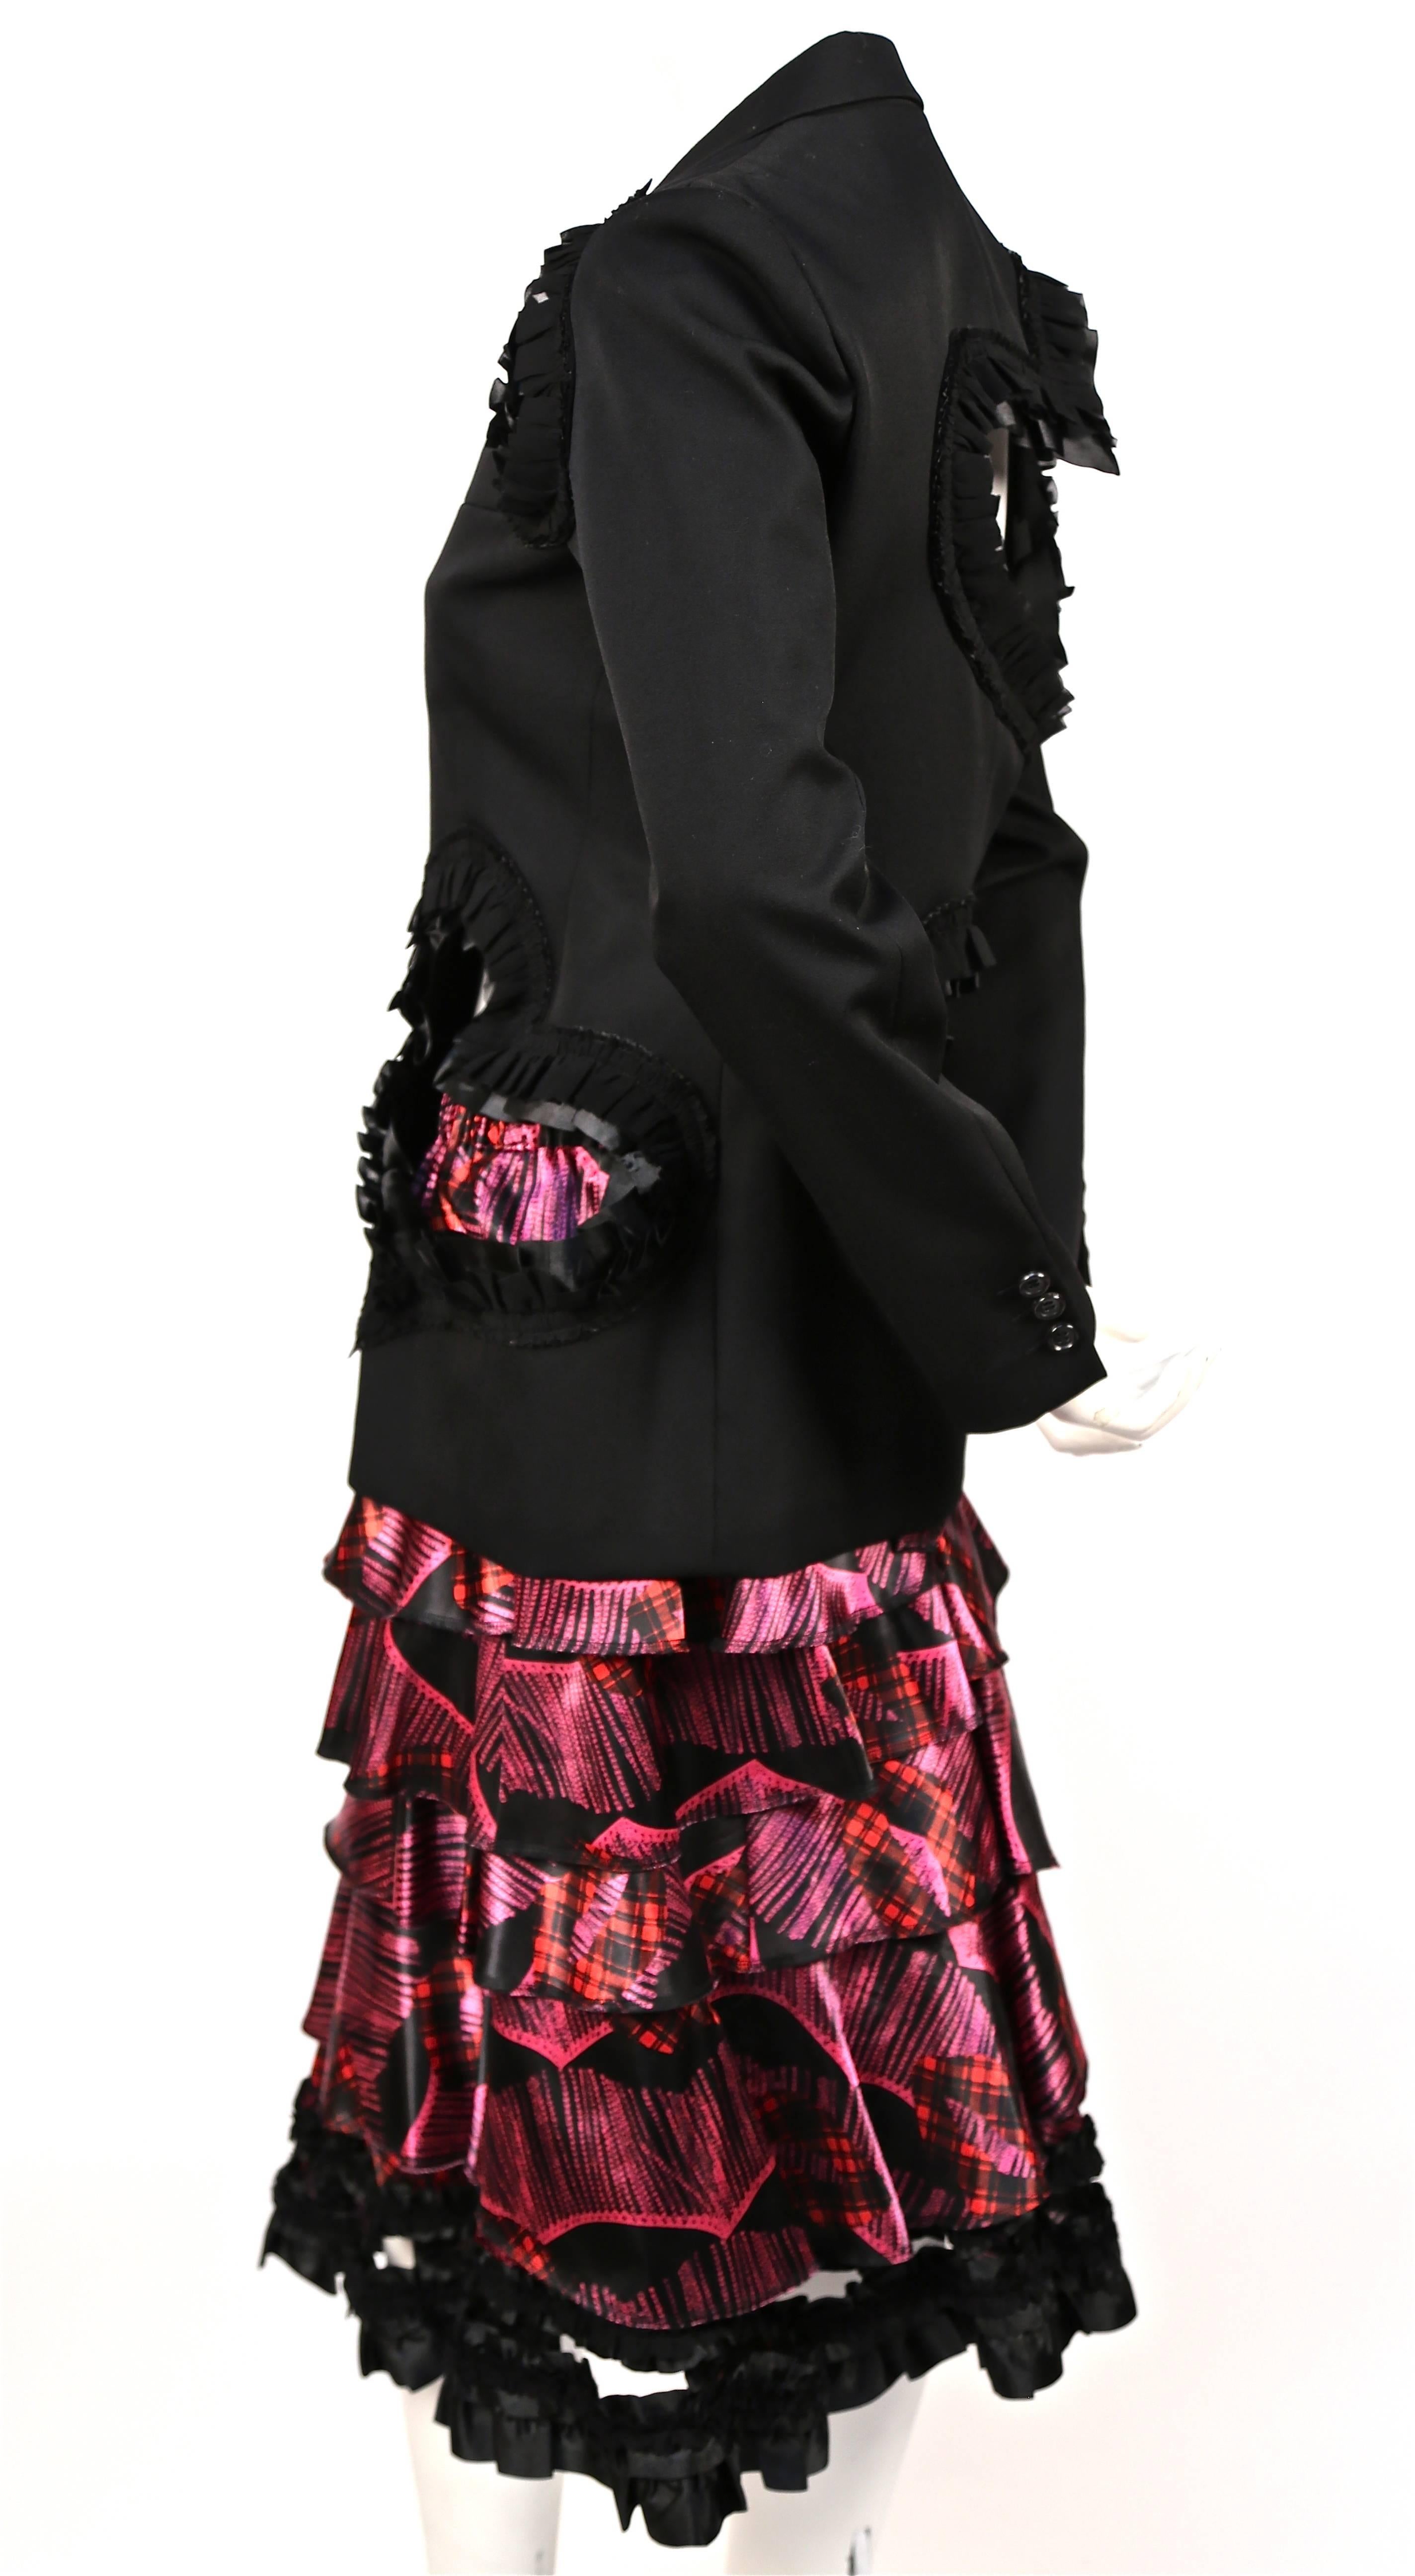 Black COMME DES GARCONS 'bad taste' runway blazer with open hearts and tiered skirt